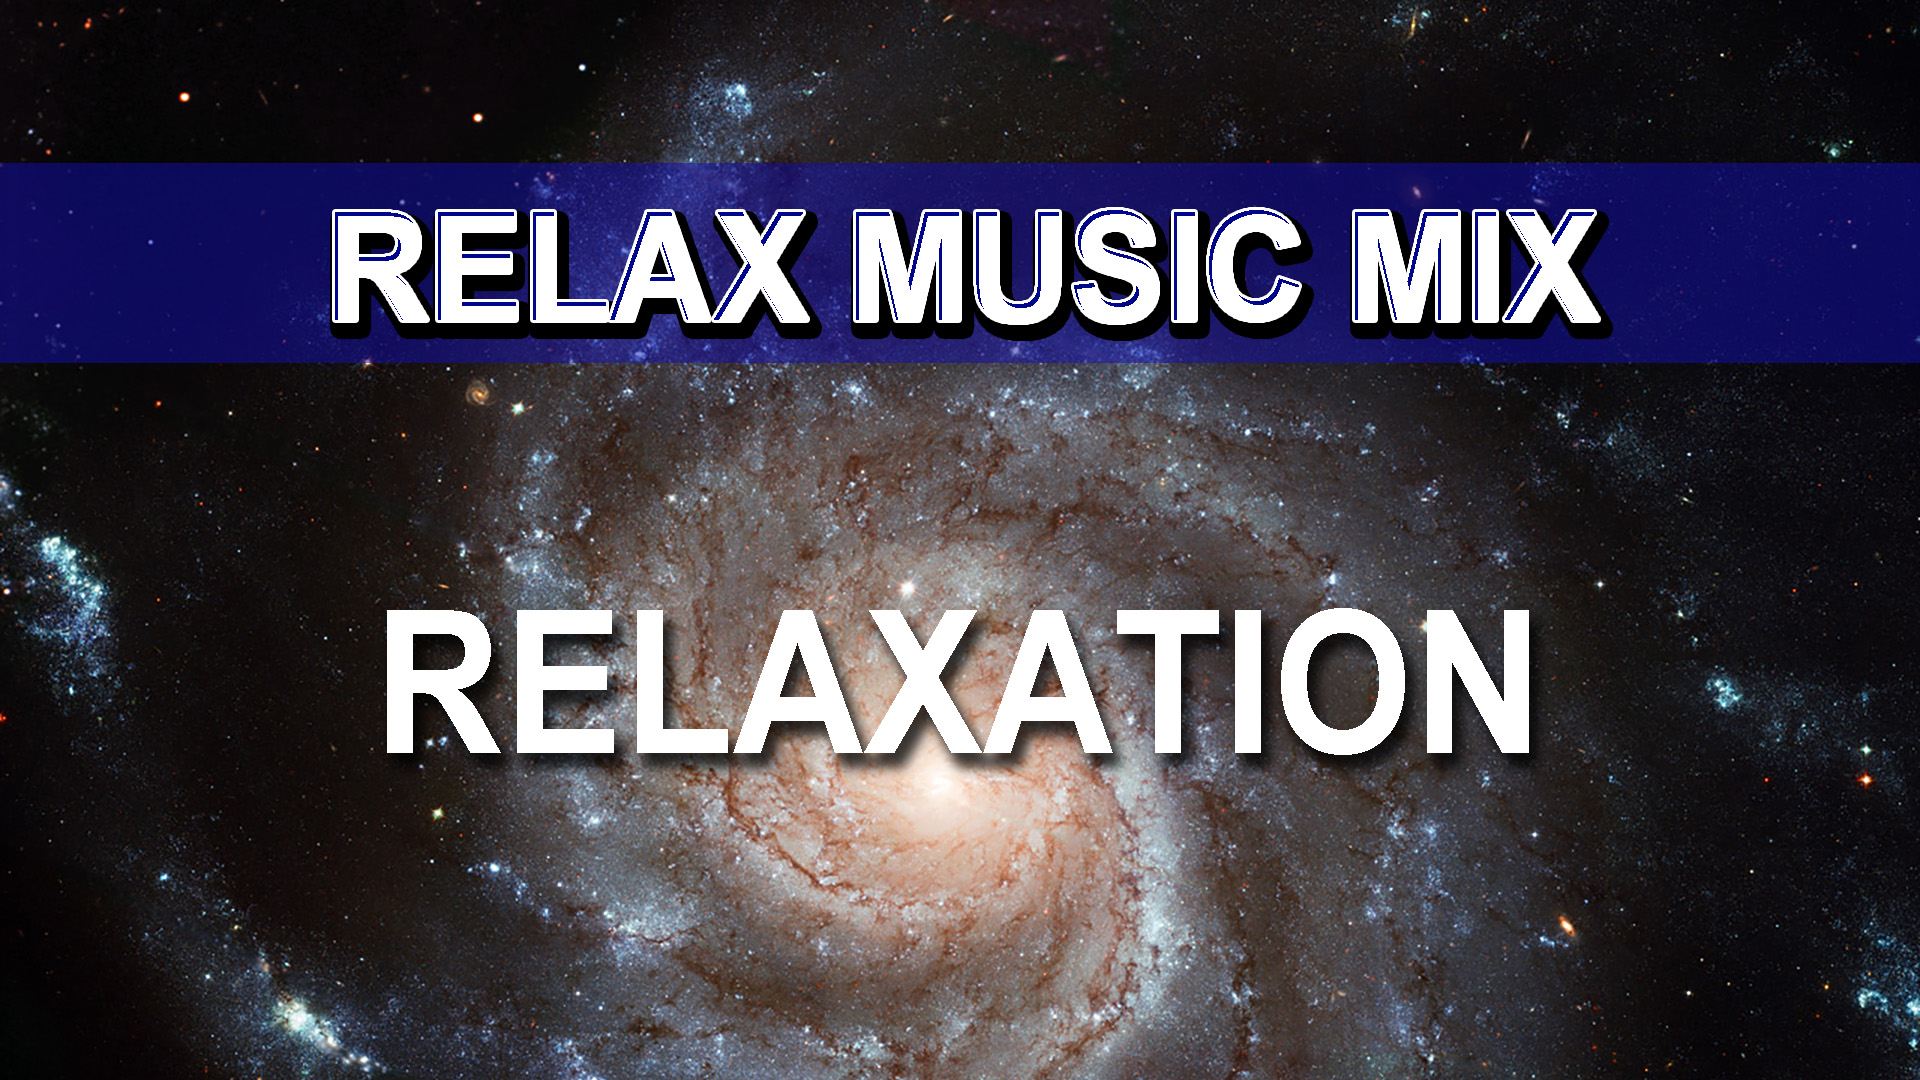 Relaxation (Relax Music Mix)